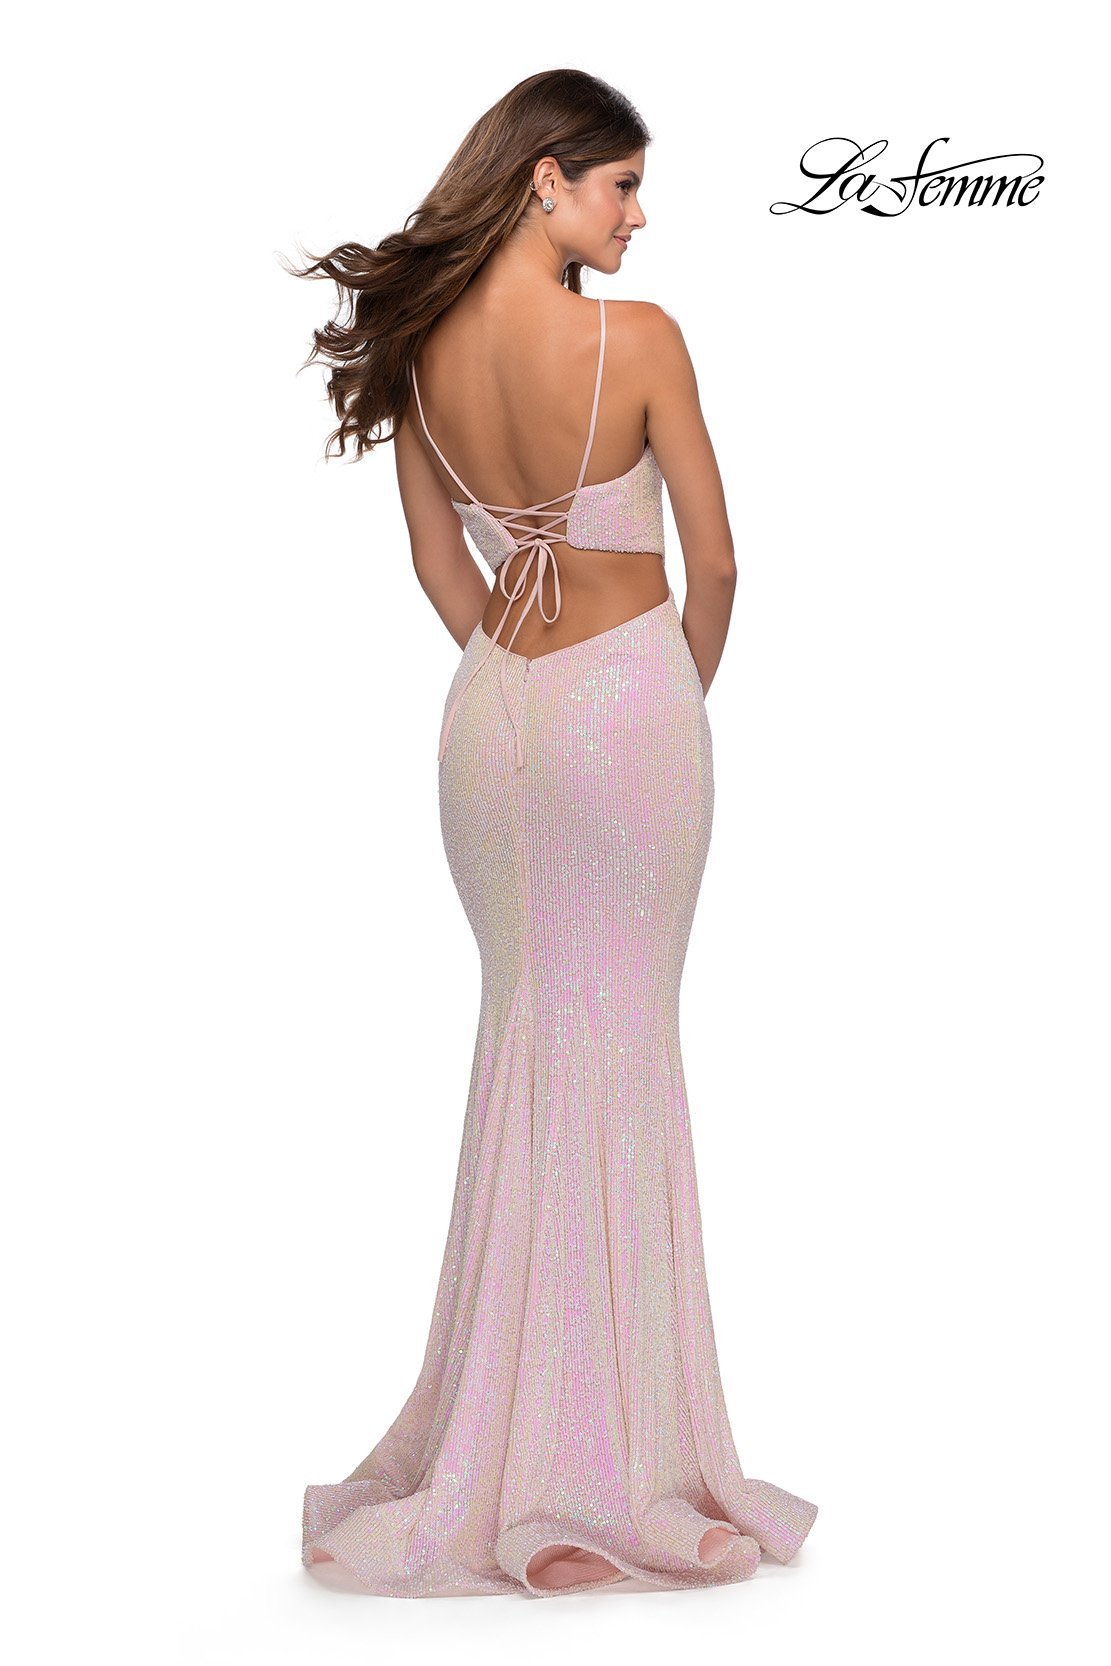 La Femme 28614 dress images in these colors: Light Pink.